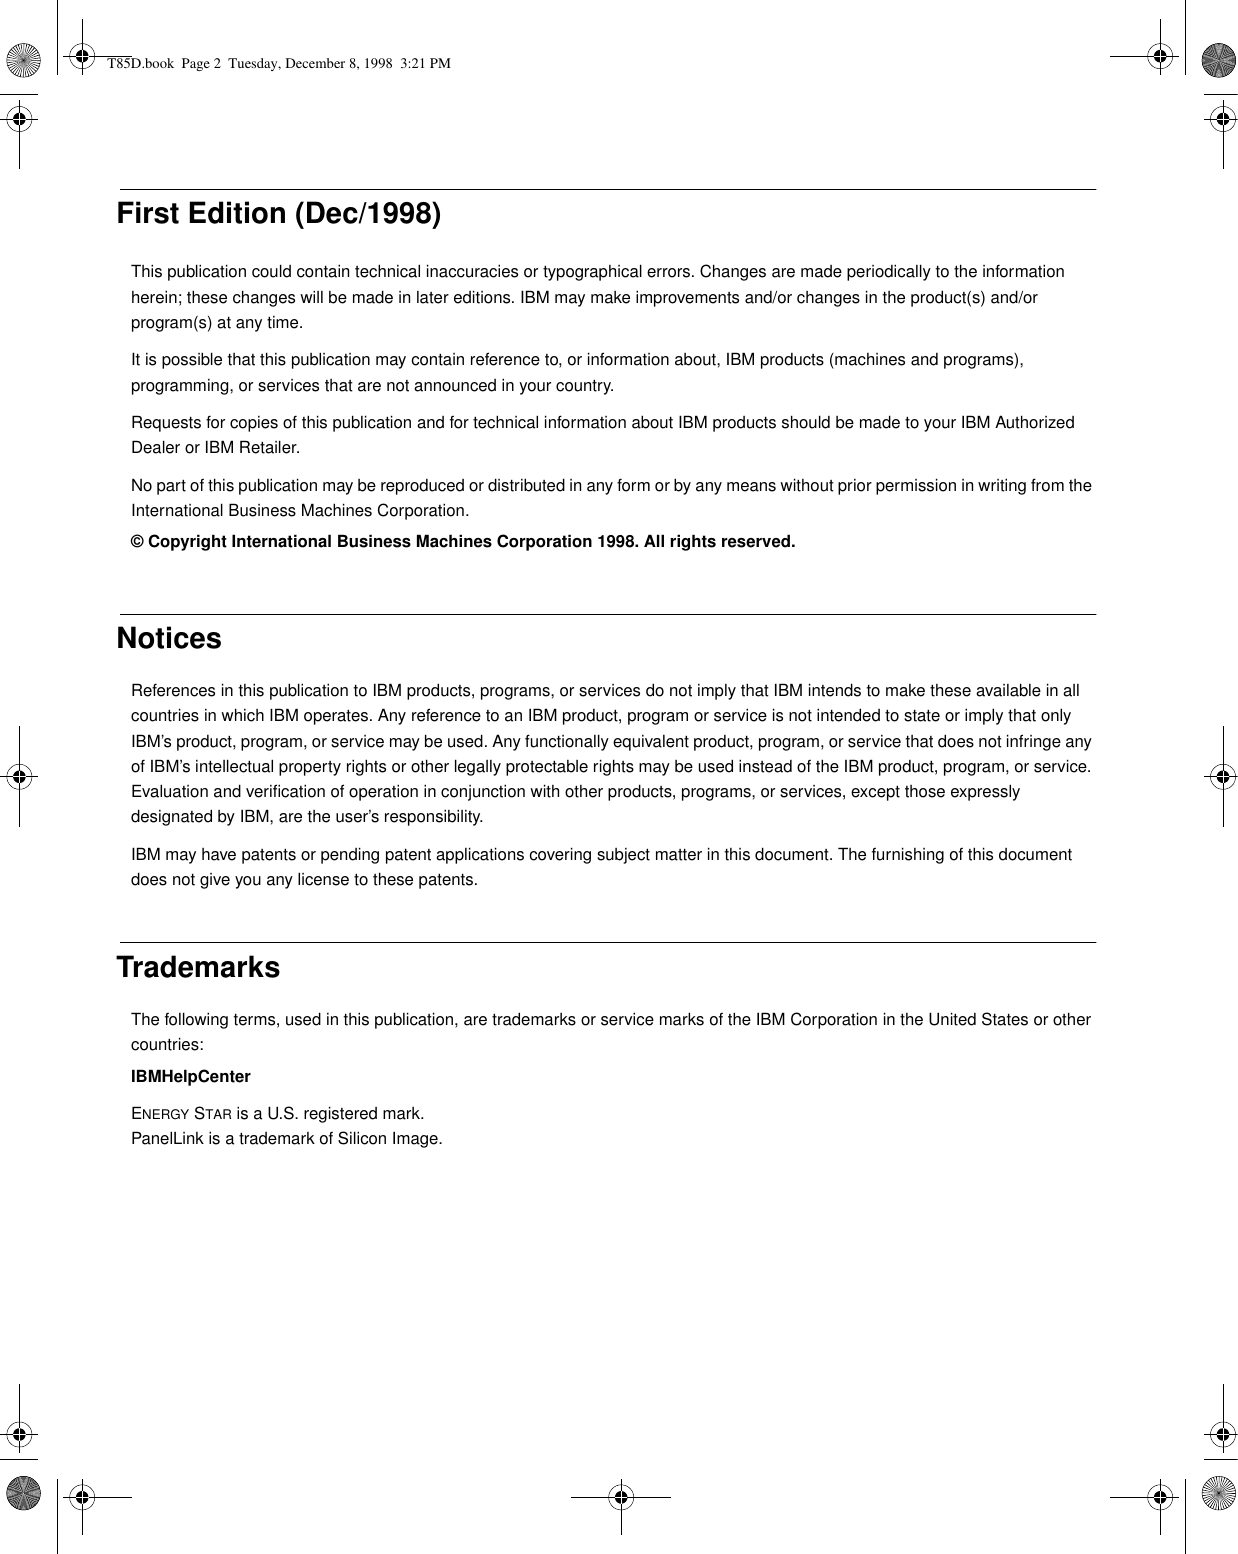 First Edition (Dec/1998)This publication could contain technical inaccuracies or typographical errors. Changes are made periodically to the information herein; these changes will be made in later editions. IBM may make improvements and/or changes in the product(s) and/or program(s) at any time.It is possible that this publication may contain reference to, or information about, IBM products (machines and programs), programming, or services that are not announced in your country. Requests for copies of this publication and for technical information about IBM products should be made to your IBM Authorized Dealer or IBM Retailer.No part of this publication may be reproduced or distributed in any form or by any means without prior permission in writing from the International Business Machines Corporation.© Copyright International Business Machines Corporation 1998. All rights reserved.NoticesReferences in this publication to IBM products, programs, or services do not imply that IBM intends to make these available in all countries in which IBM operates. Any reference to an IBM product, program or service is not intended to state or imply that only IBM’s product, program, or service may be used. Any functionally equivalent product, program, or service that does not infringe any of IBM’s intellectual property rights or other legally protectable rights may be used instead of the IBM product, program, or service. Evaluation and verification of operation in conjunction with other products, programs, or services, except those expressly designated by IBM, are the user’s responsibility.IBM may have patents or pending patent applications covering subject matter in this document. The furnishing of this document does not give you any license to these patents. TrademarksThe following terms, used in this publication, are trademarks or service marks of the IBM Corporation in the United States or other countries:IBMHelpCenterENERGY STAR is a U.S. registered mark.PanelLink is a trademark of Silicon Image.T85D.book  Page 2  Tuesday, December 8, 1998  3:21 PM